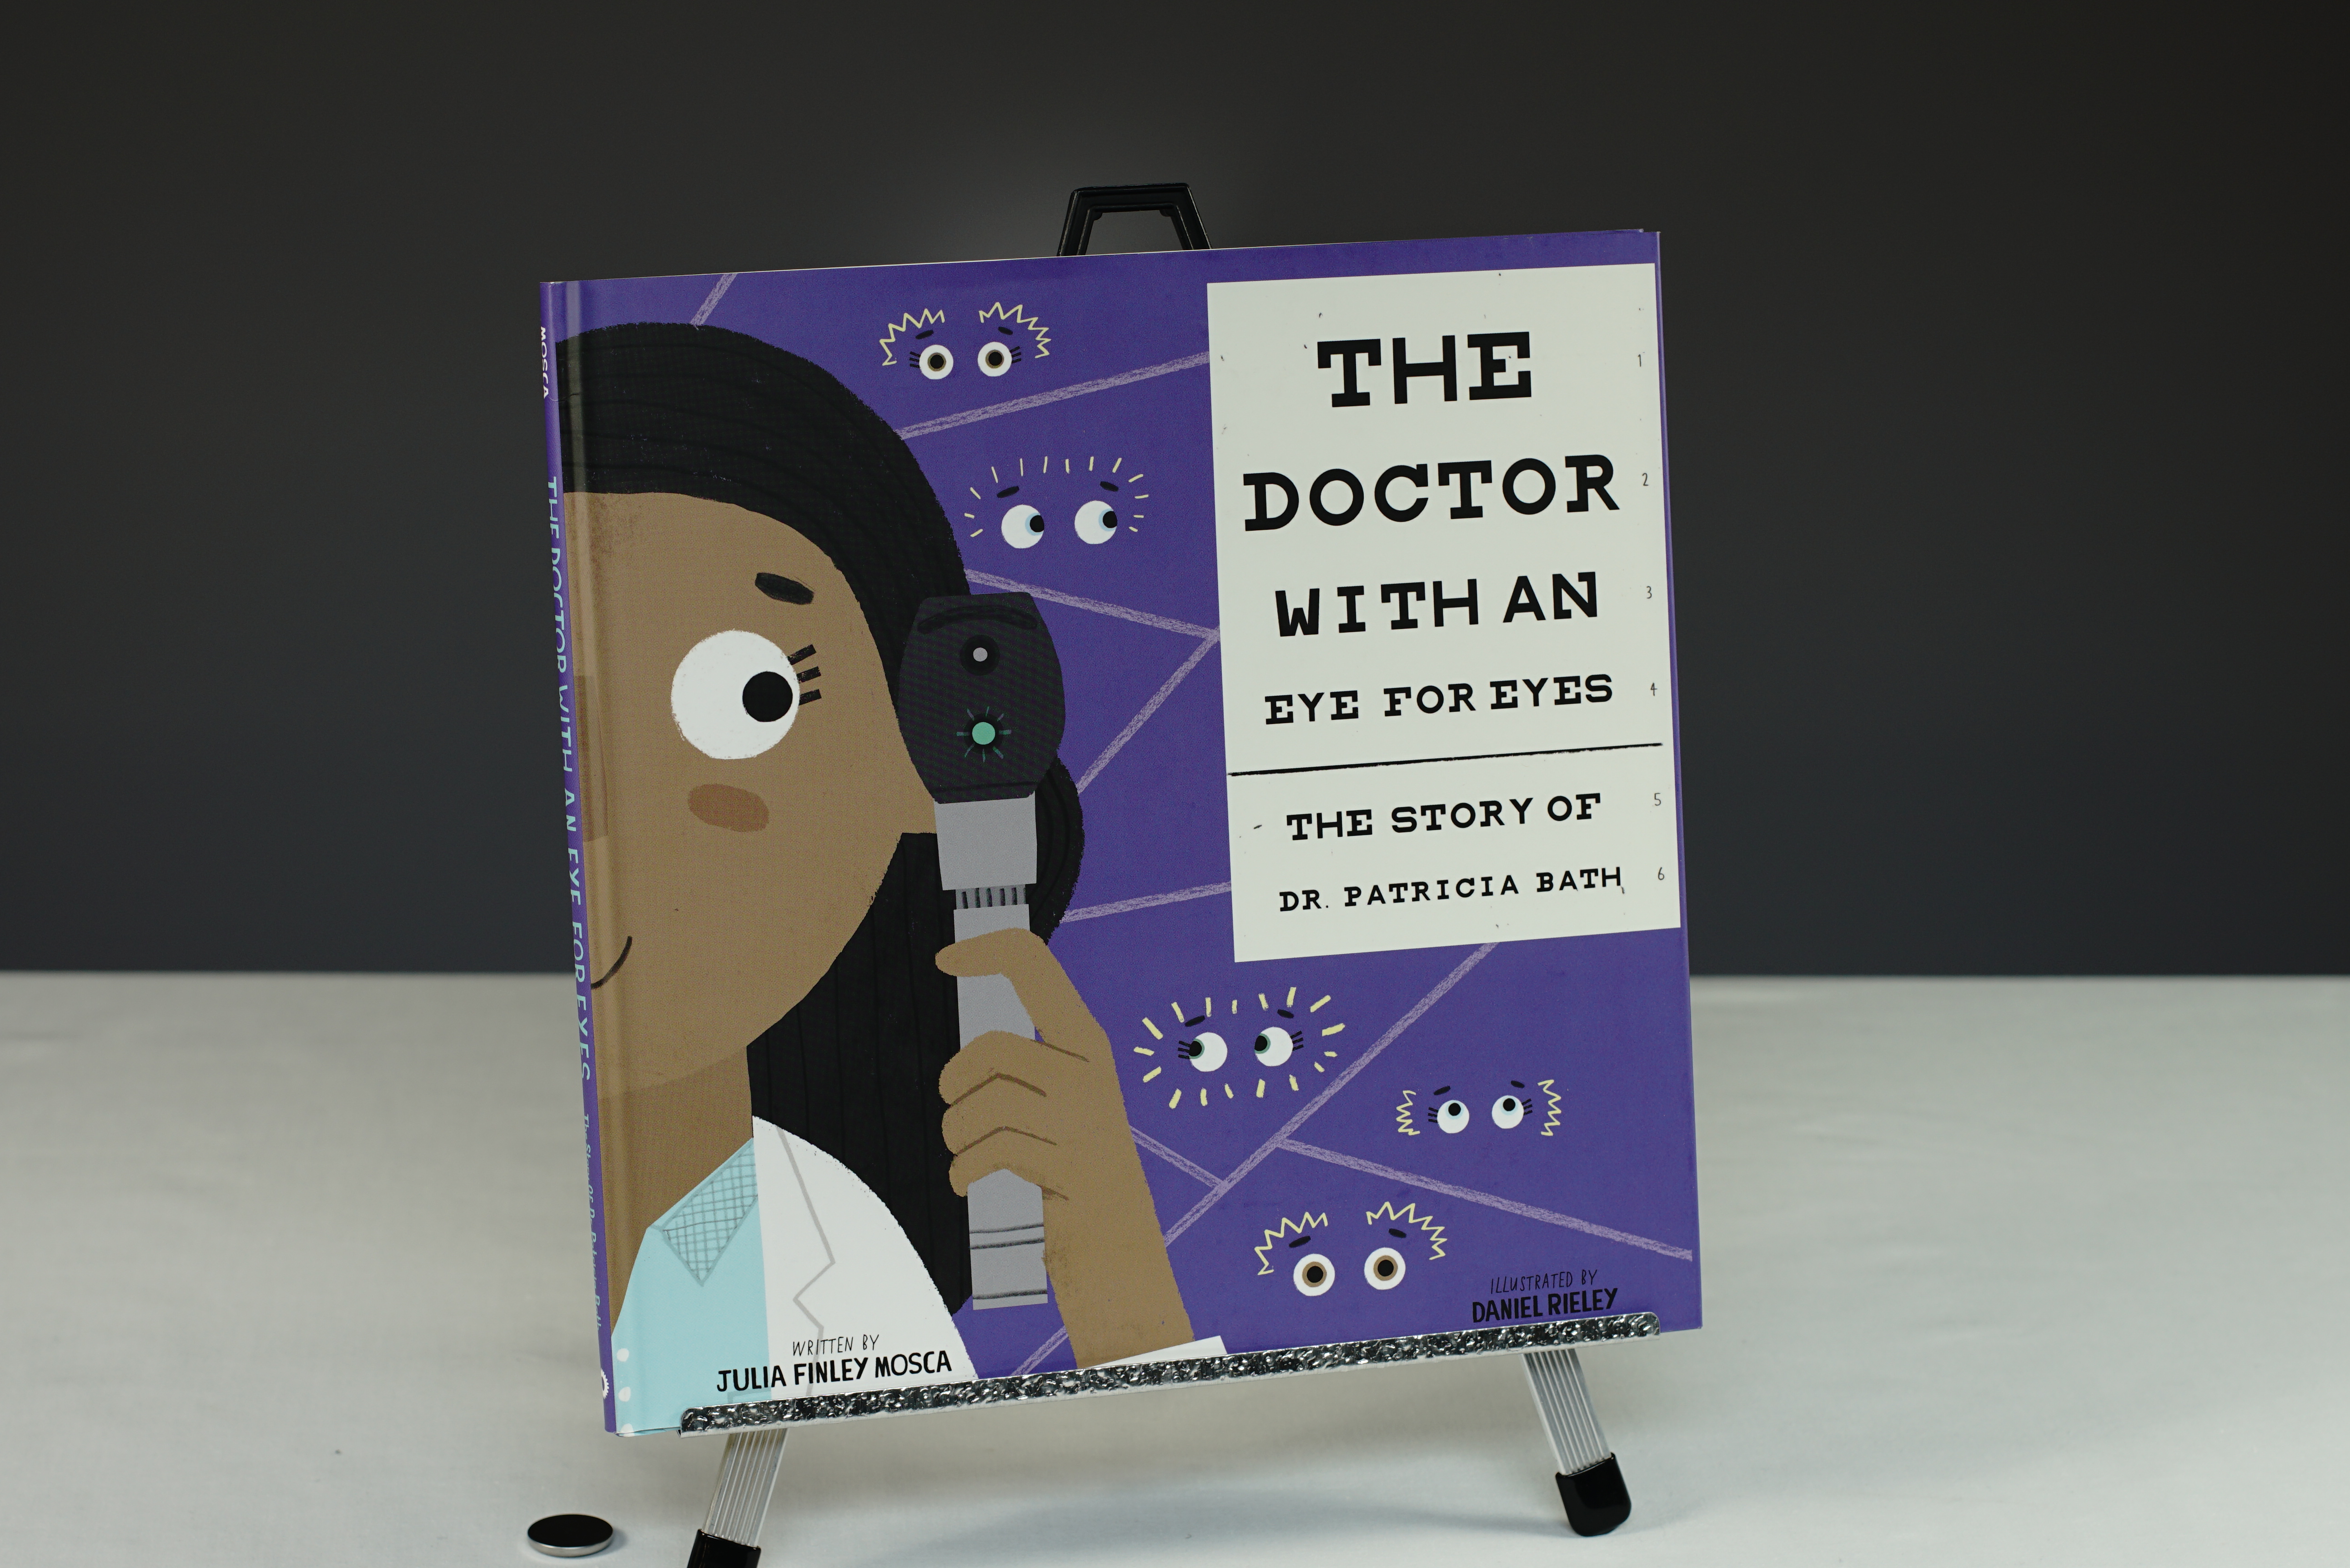 The Doctor with an Eye for Eyes - The Story of Dr. Patricia Bath